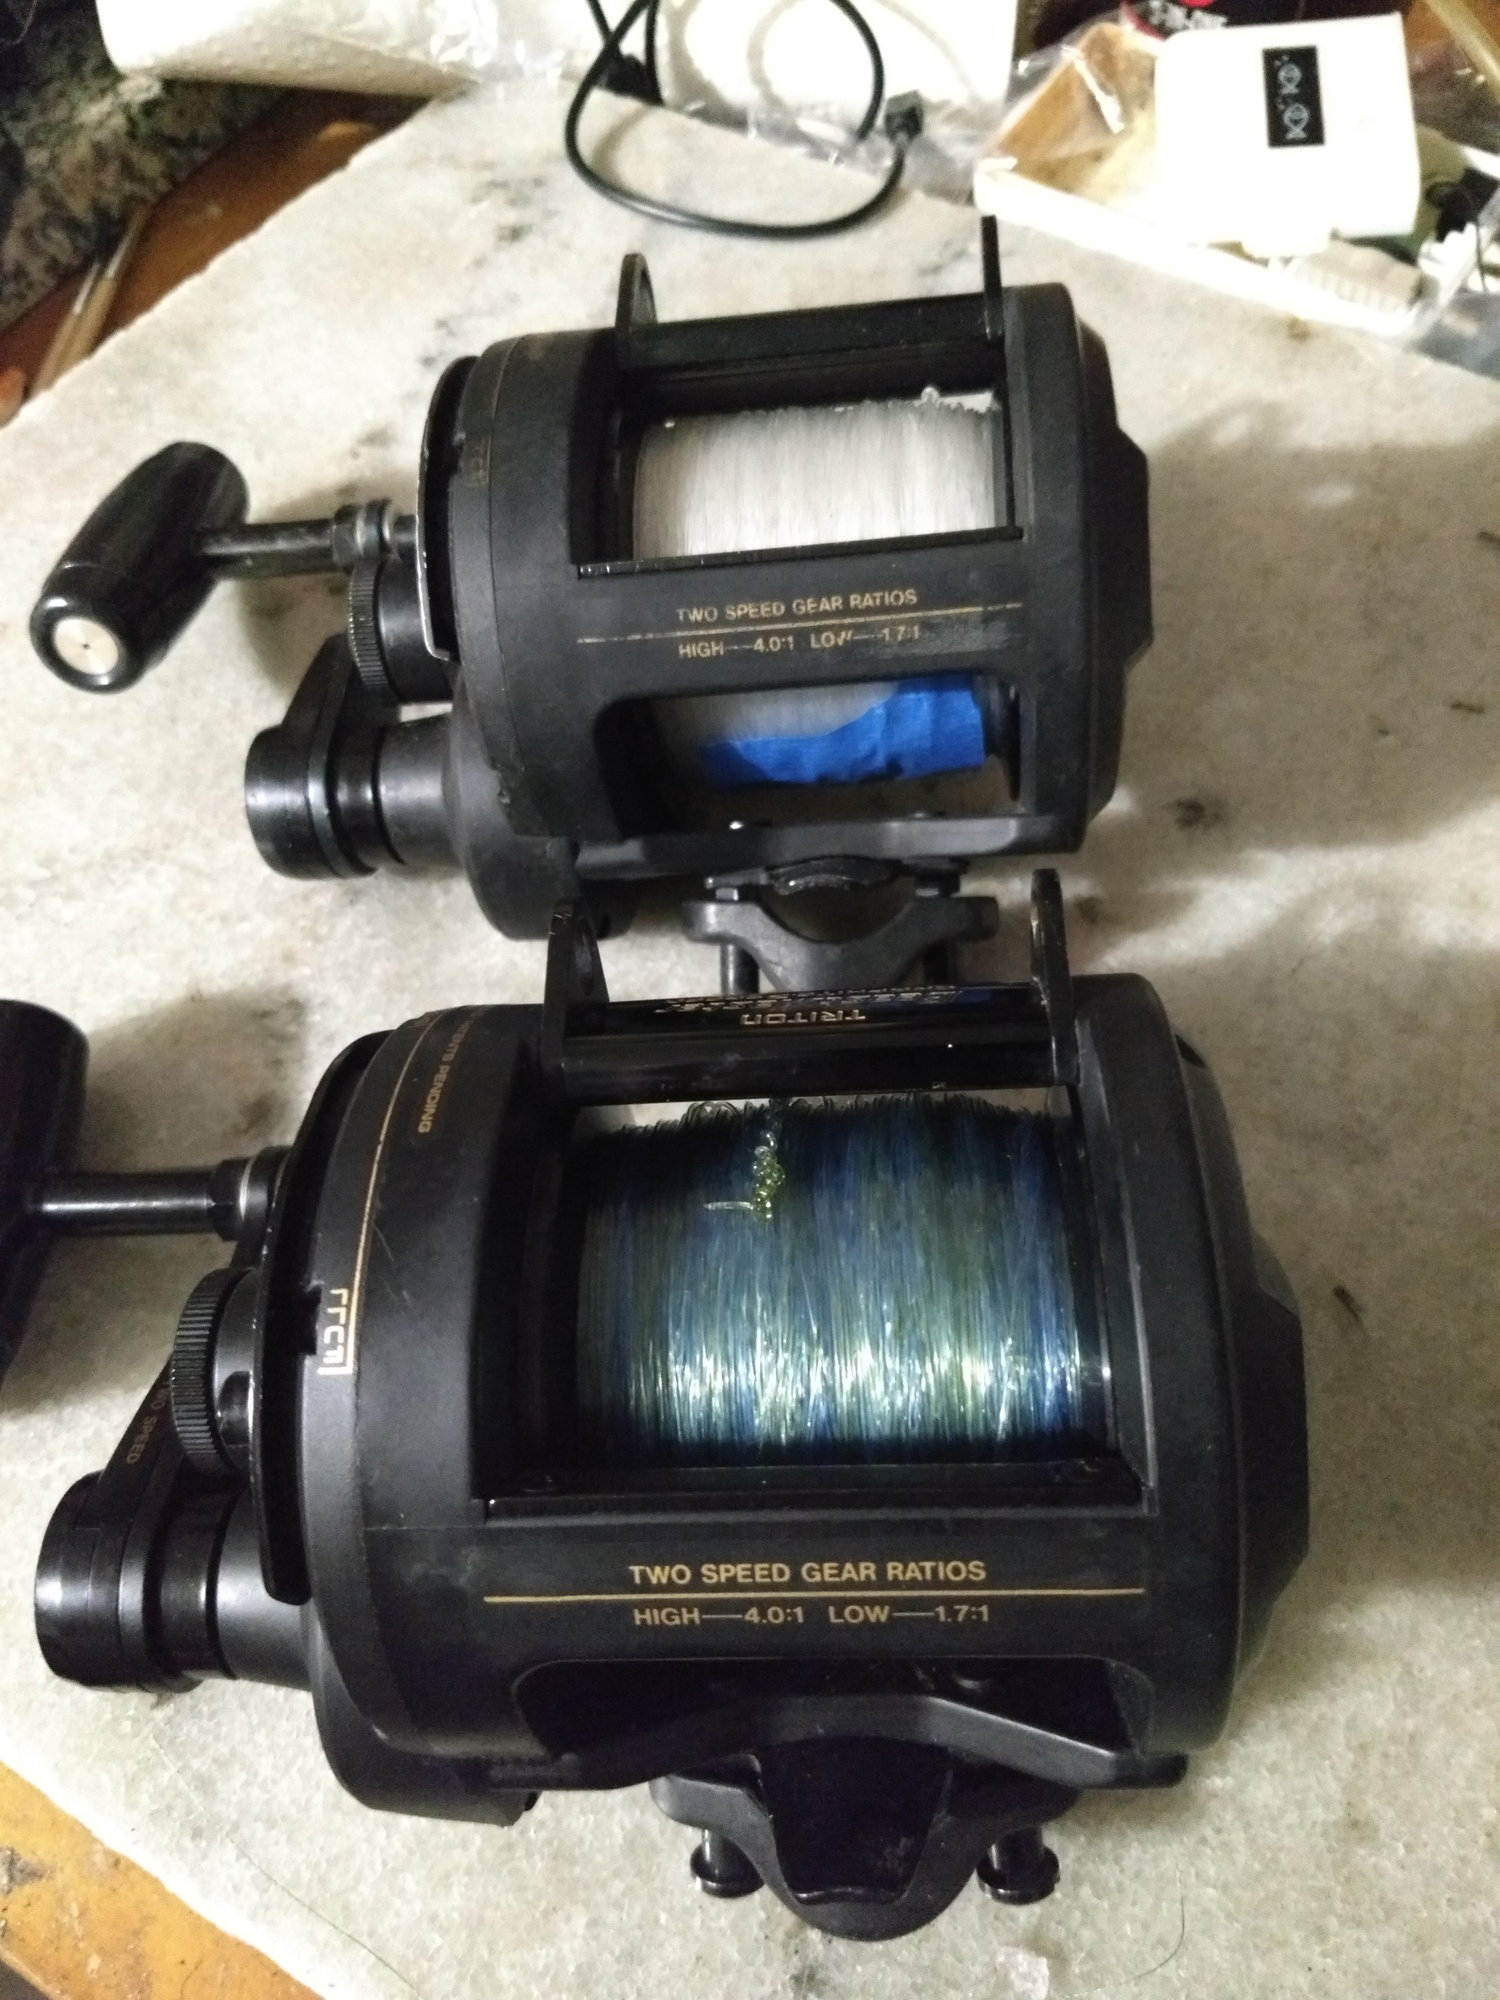 Shimano Triton Trolling Series 50W, Beastmaster 20/50 2-speeds, Old TLD 20  - The Hull Truth - Boating and Fishing Forum